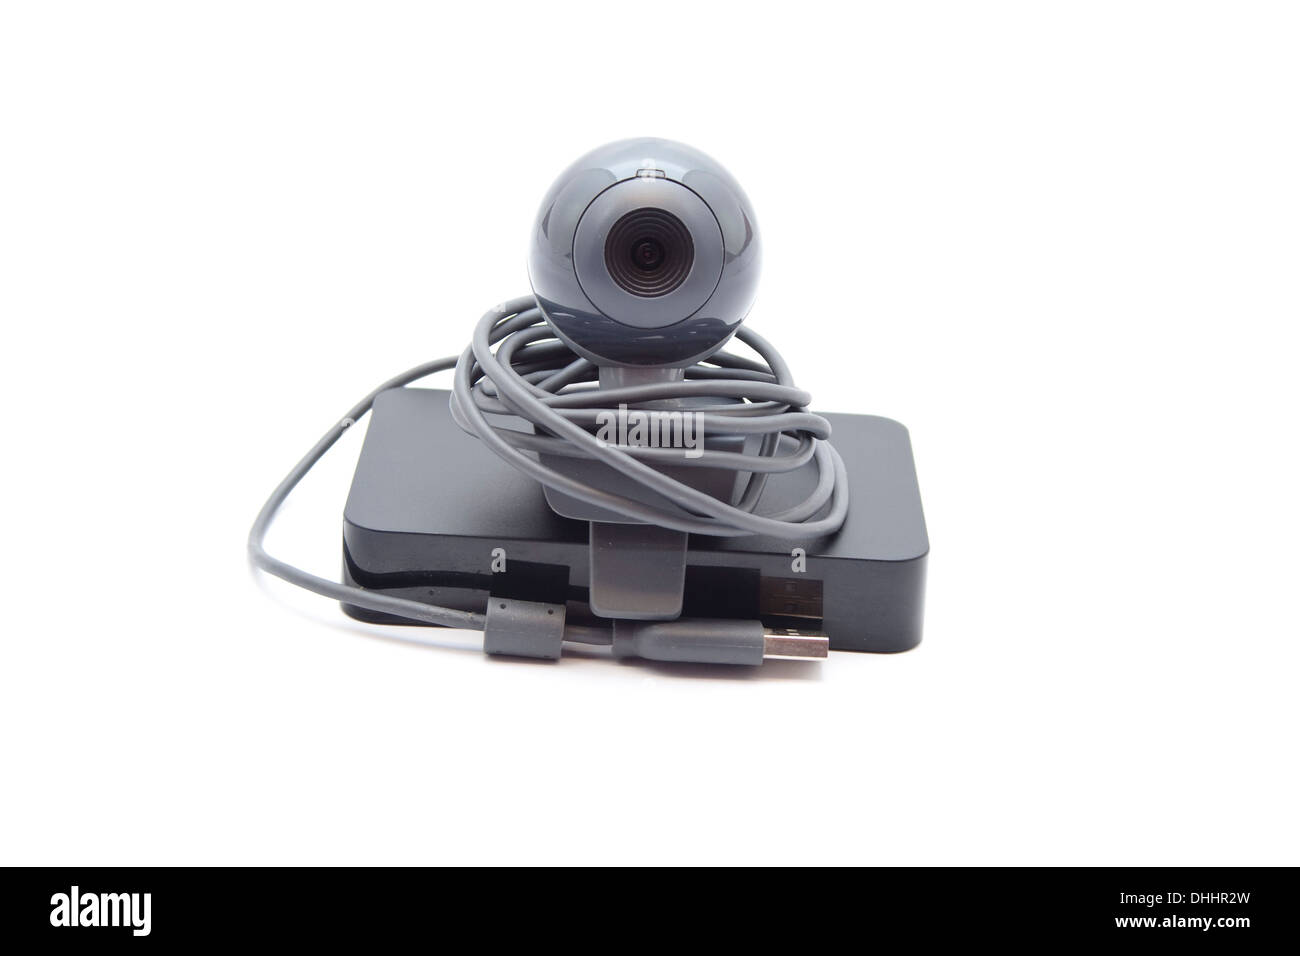 Webcam with External Hard Drive Disk Stock Photo